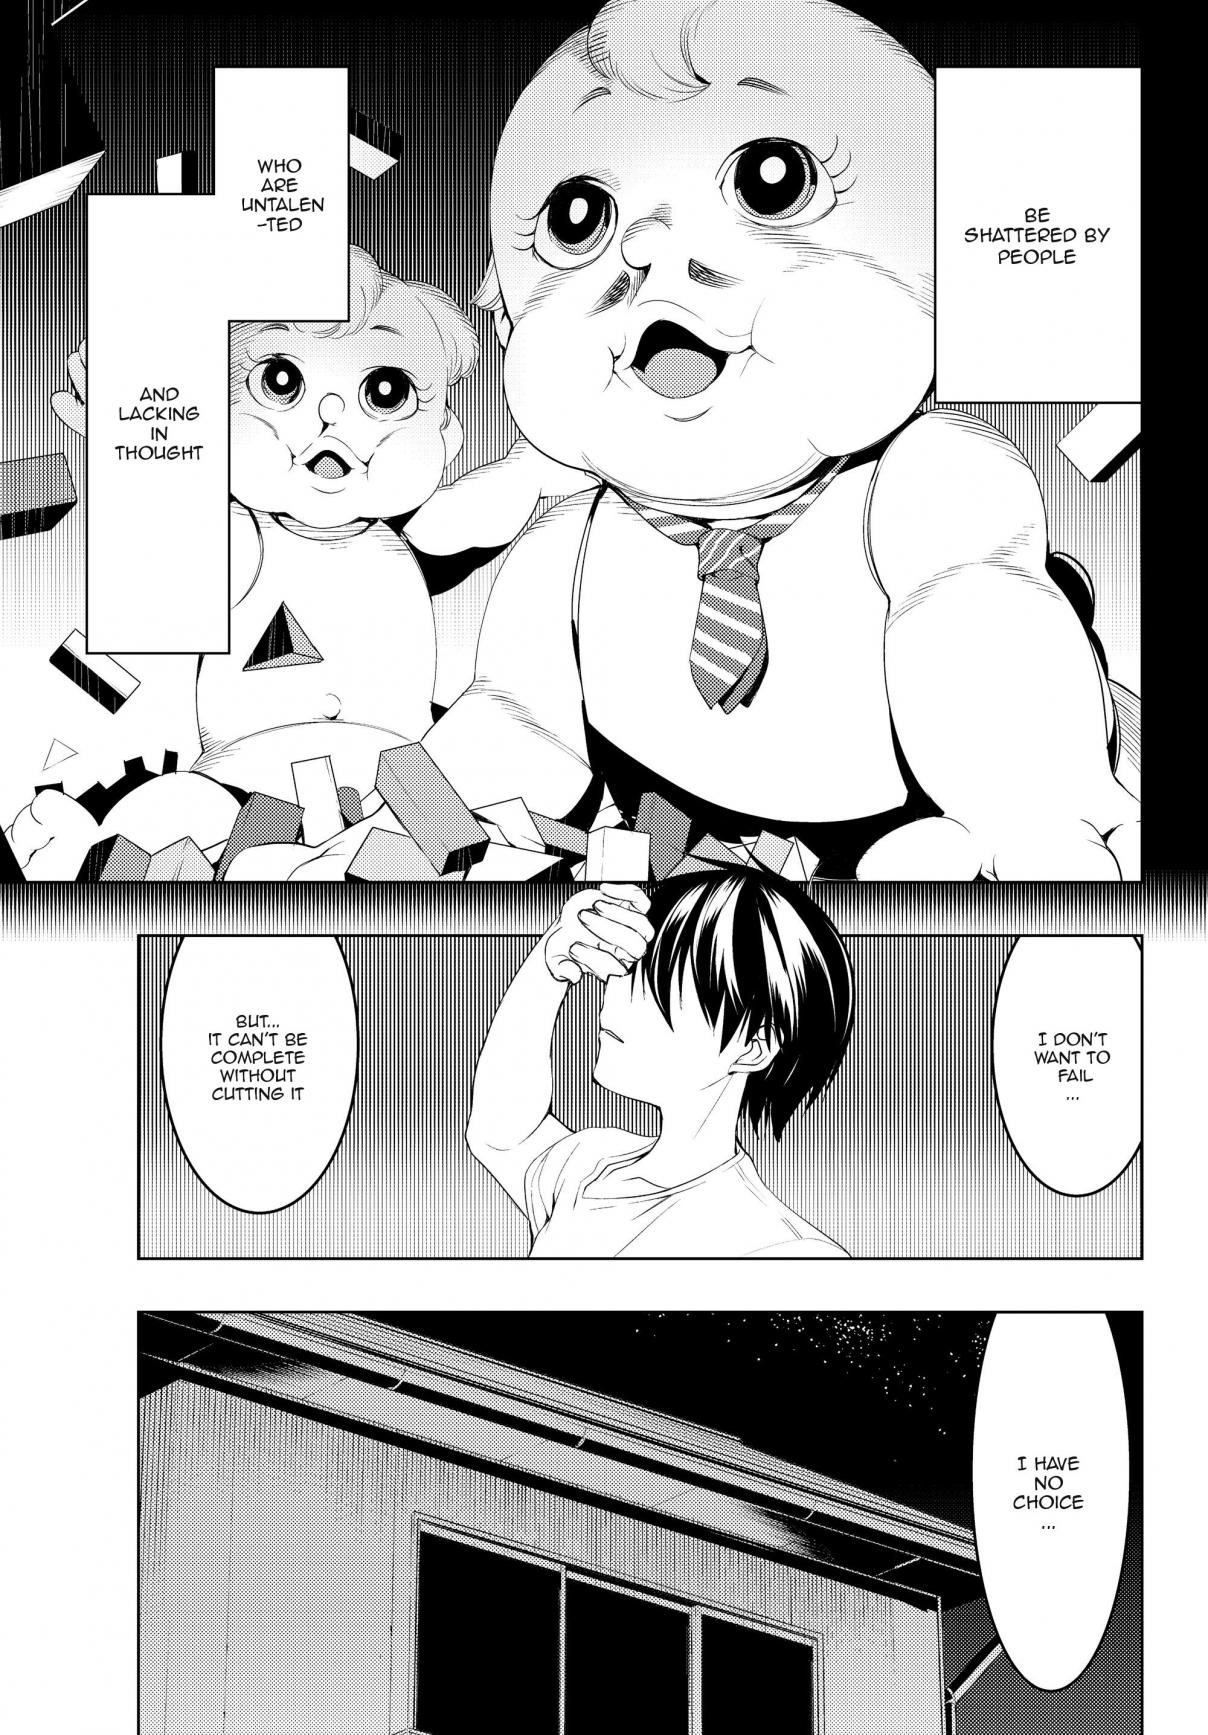 Bokutachi no Remake Vol. 2 Ch. 7 The answer to the promise